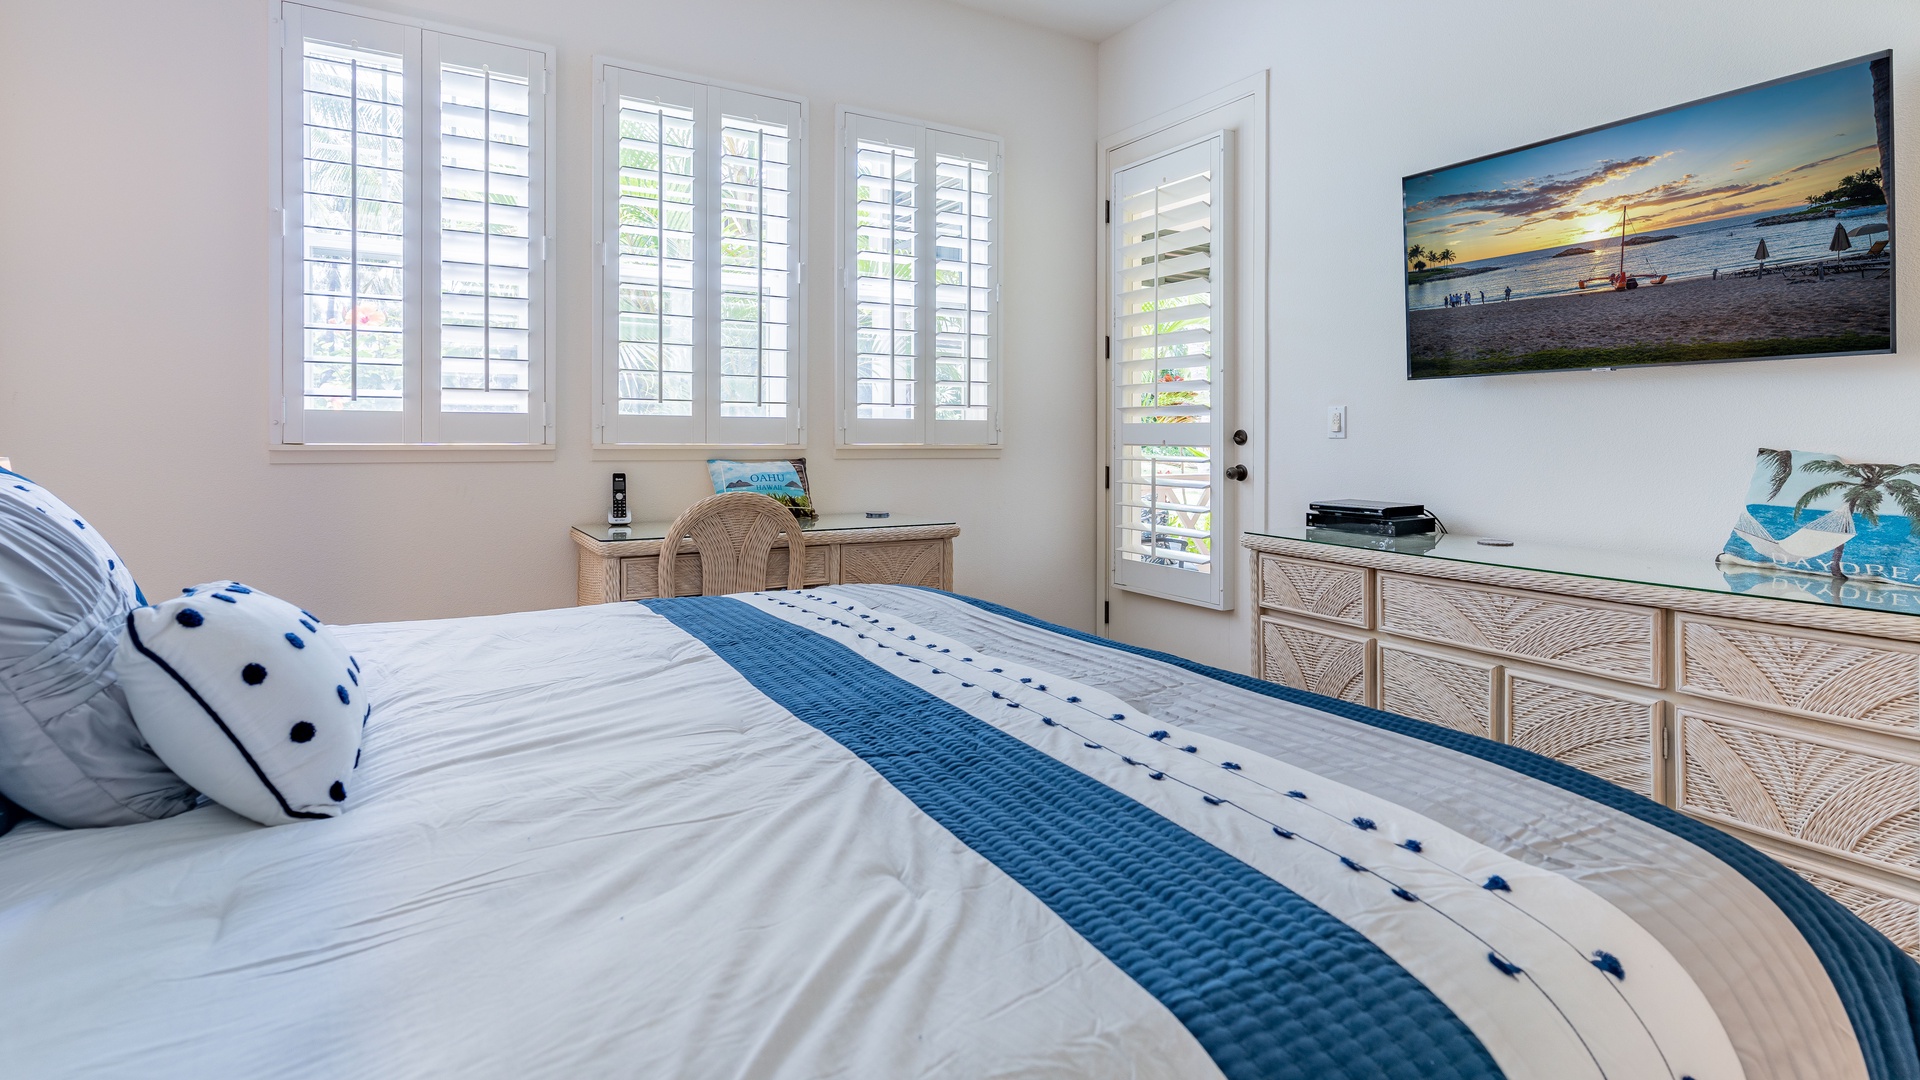 Kapolei Vacation Rentals, Coconut Plantation 1208-2 - The primary guest bedroom with lanai access and a TV.